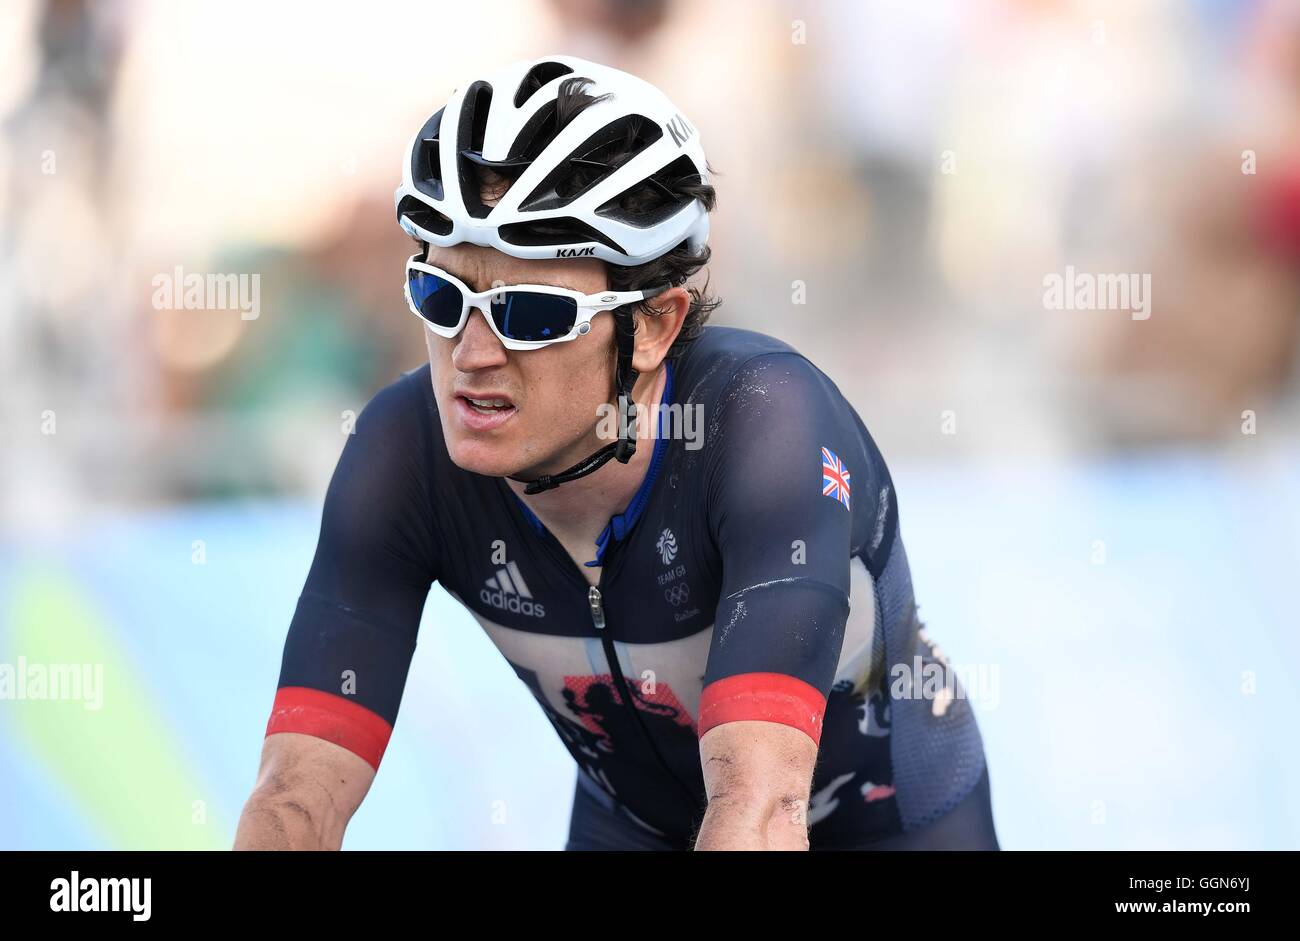 Rio de Janeiro, Brazil. 06th Aug, 2016. Geraint Thomas (GBR) looks disappointed as he finishes. Mens road race. Cycling. Copacobana beach. Rio de Janeiro, Brazil. 06th Aug, 2016. Credit:  Sport In Pictures/Alamy Live News Stock Photo